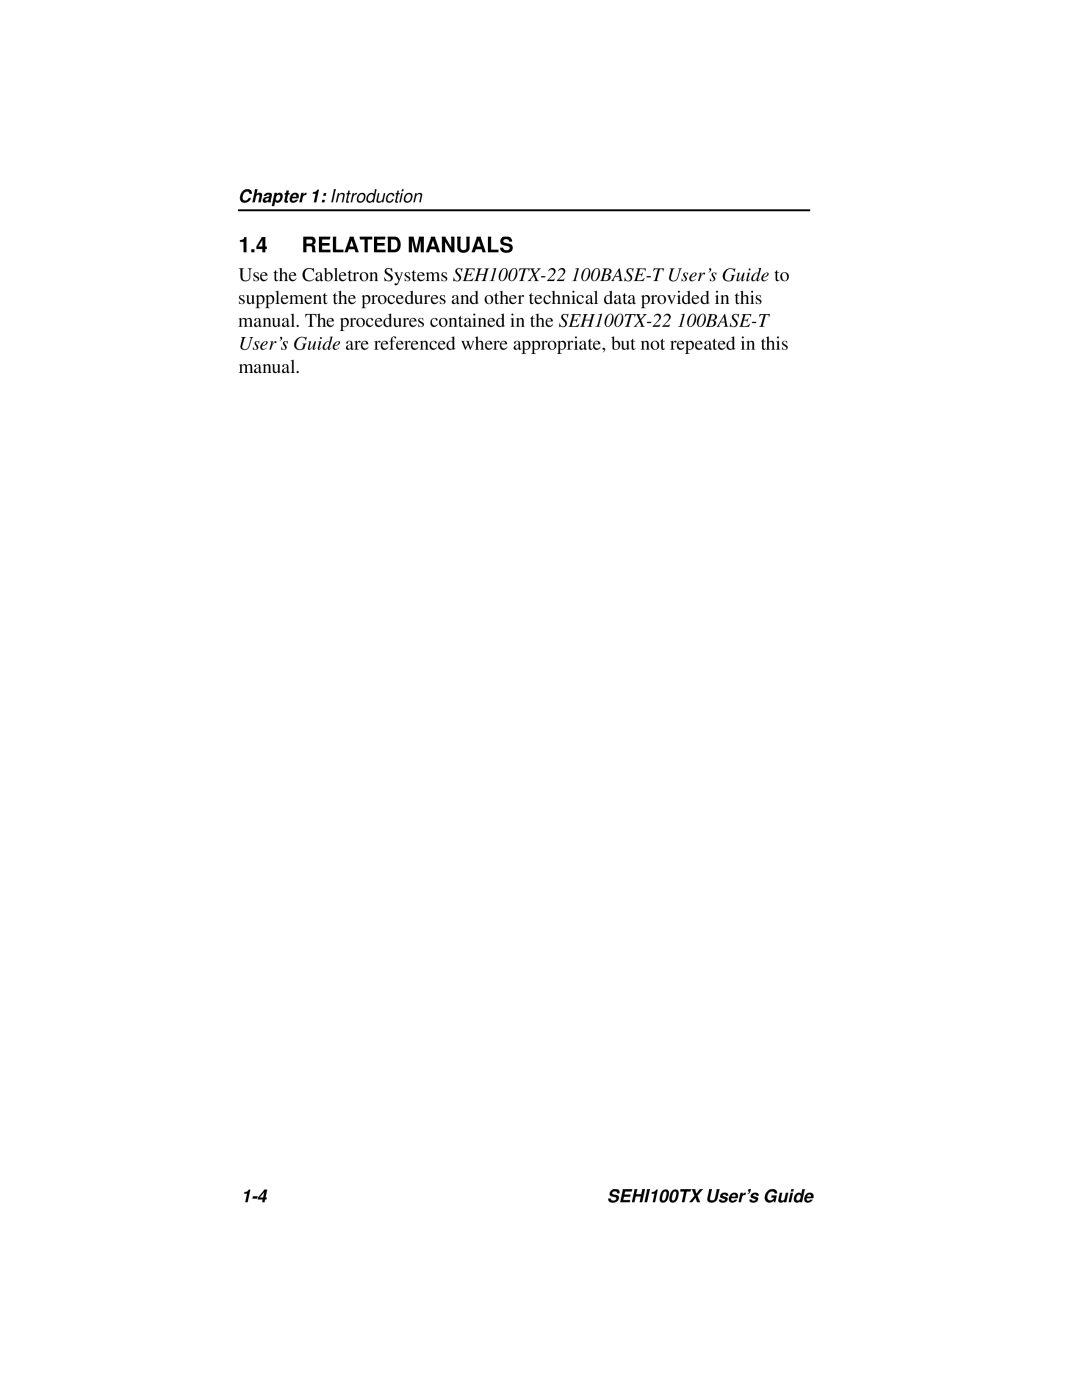 Cabletron Systems SEHI100TX-22 manual Related Manuals, Introduction, SEHI100TX User’s Guide 